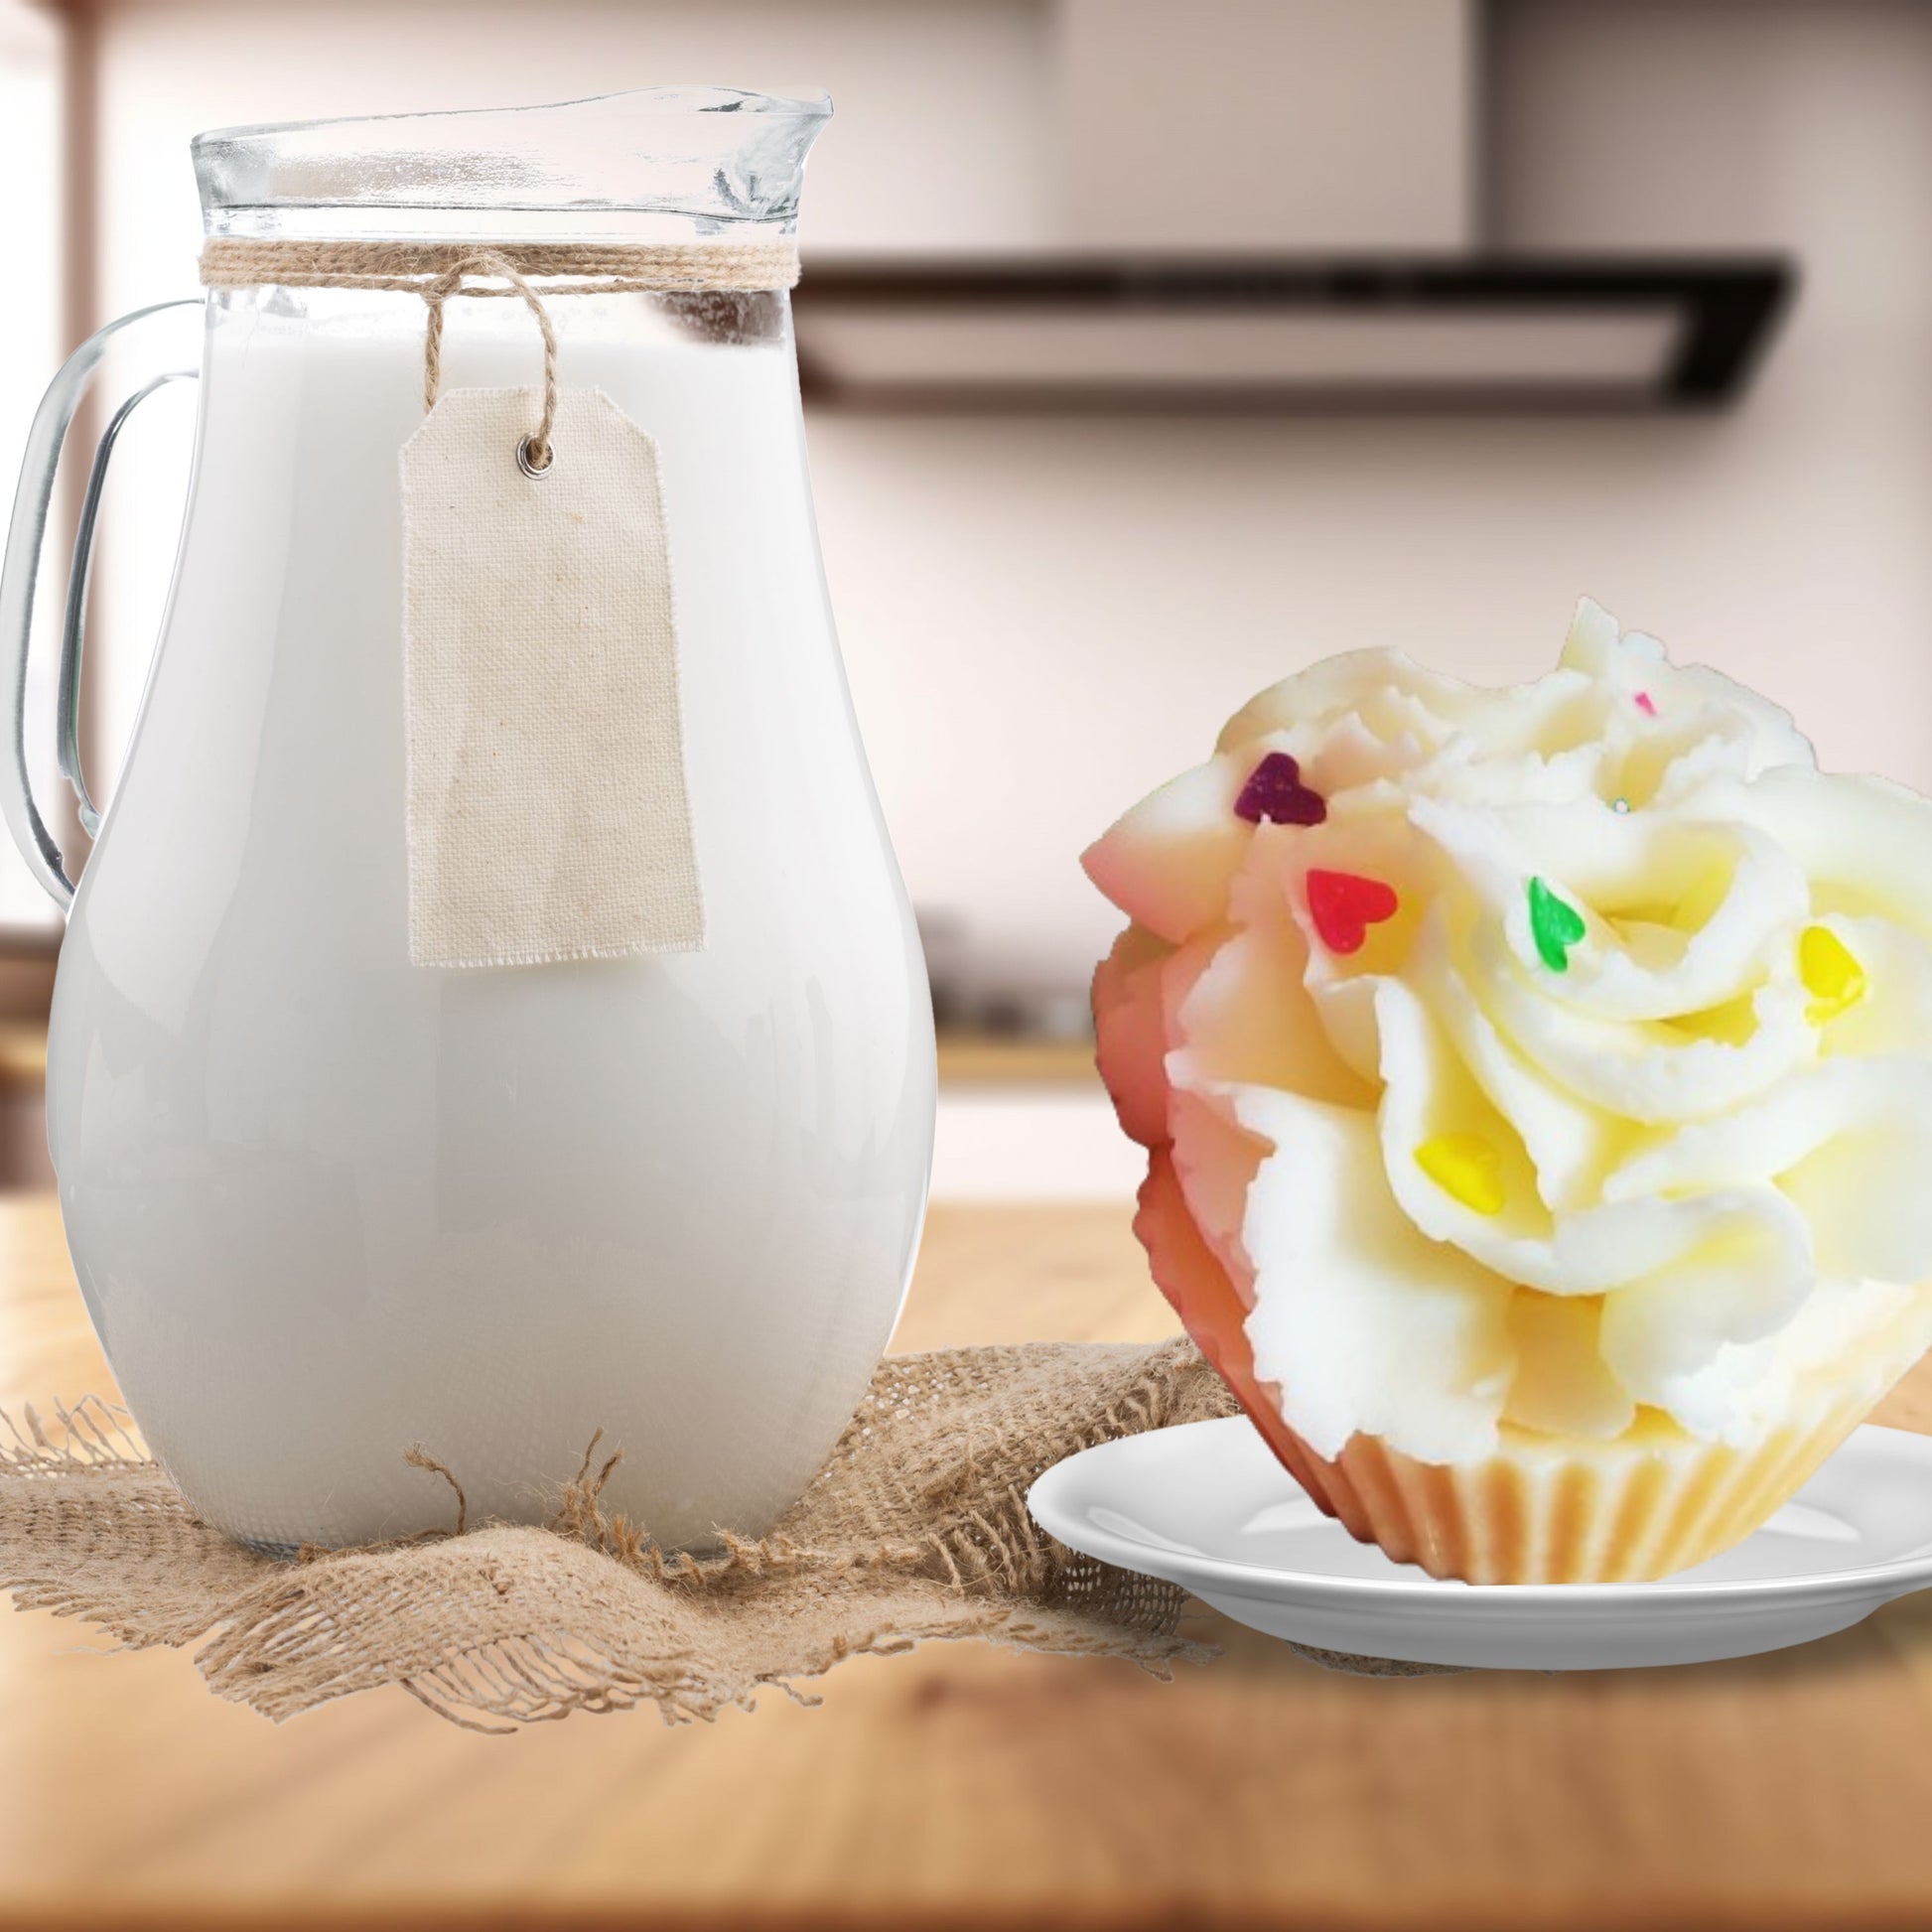 Cafe Delights White Icing Cupcake Scented Soy Wax Melts